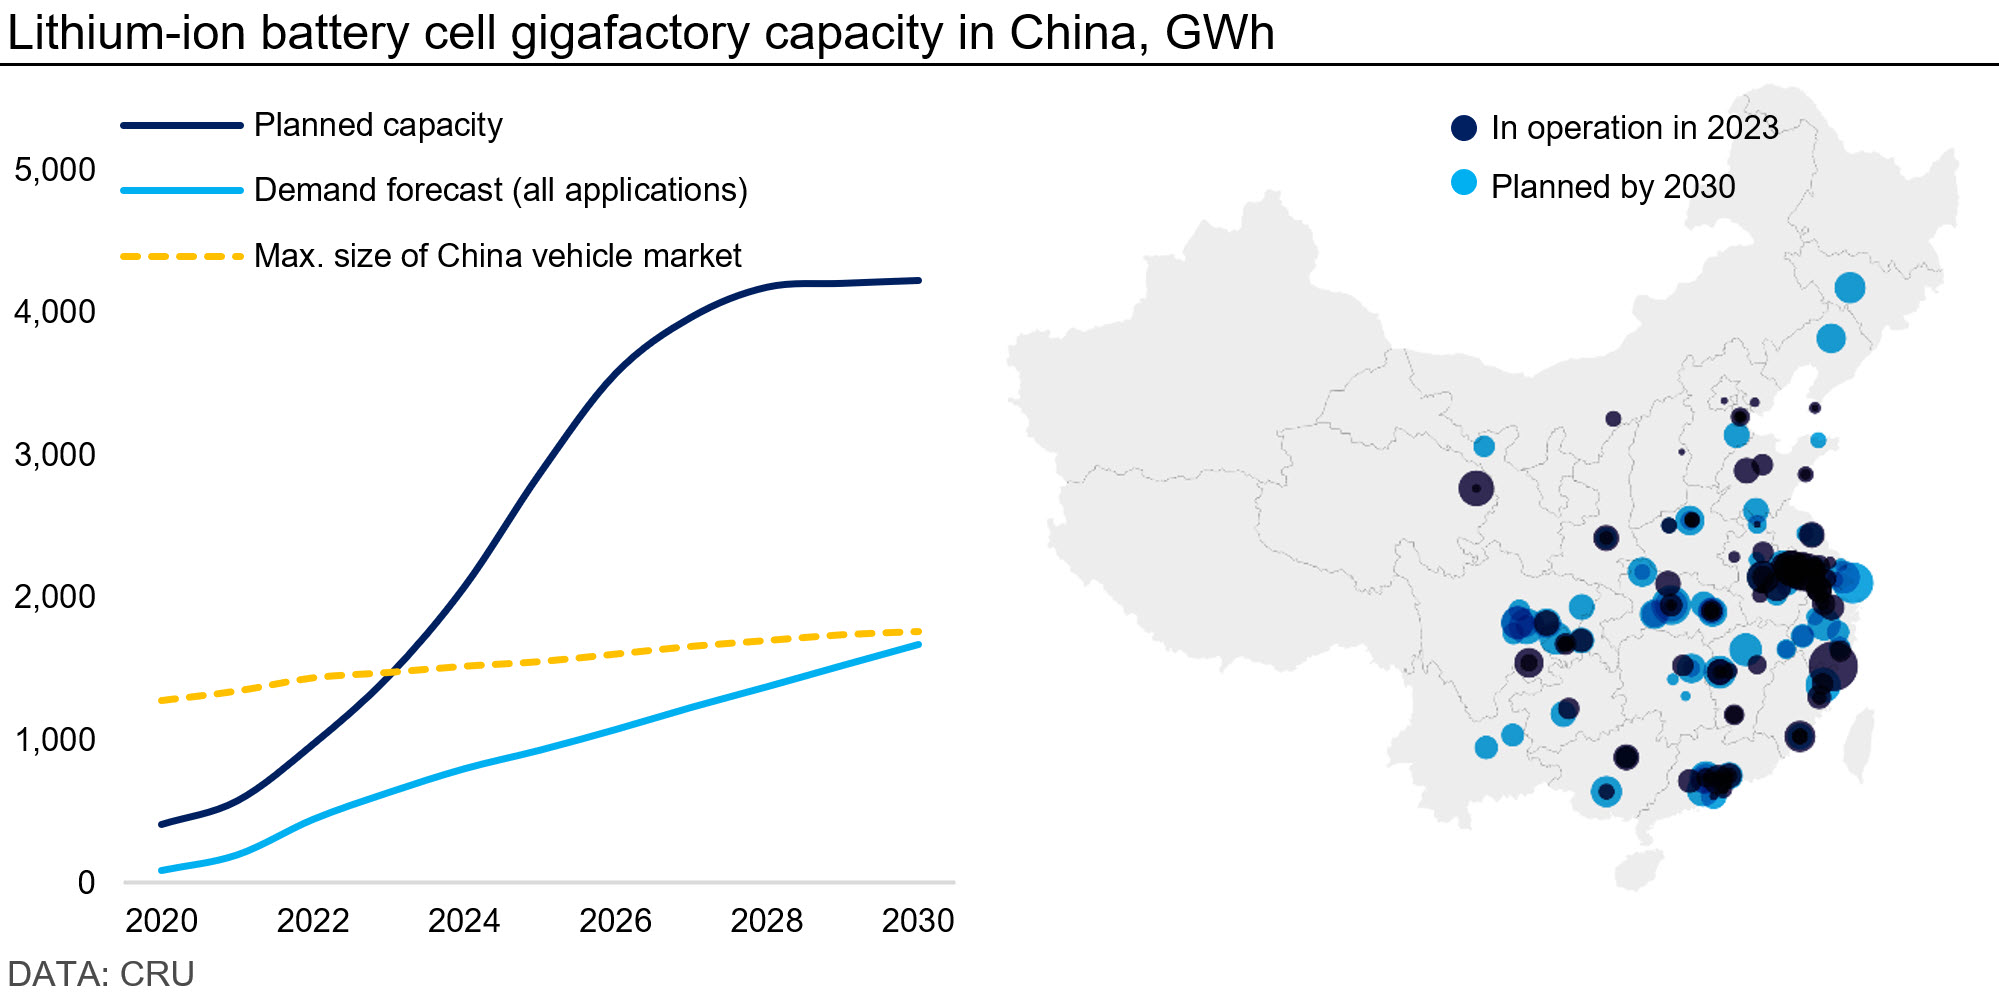 Graph showing lithium-ion battery cell gigafactory capacity in China